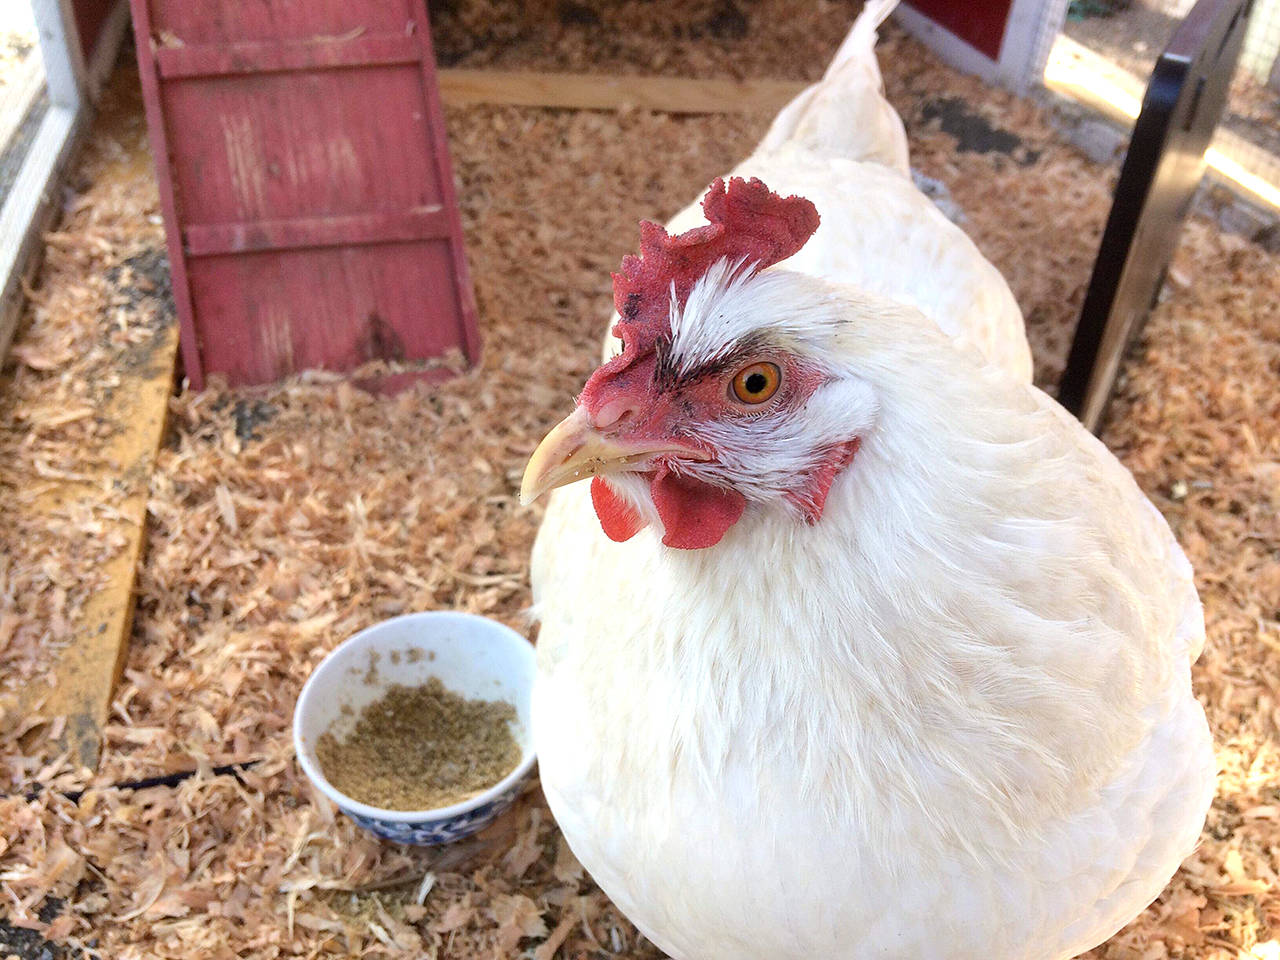 Michael Carman/Peninsula Daily News Trixie the chicken, pet hen of the author’s sister.